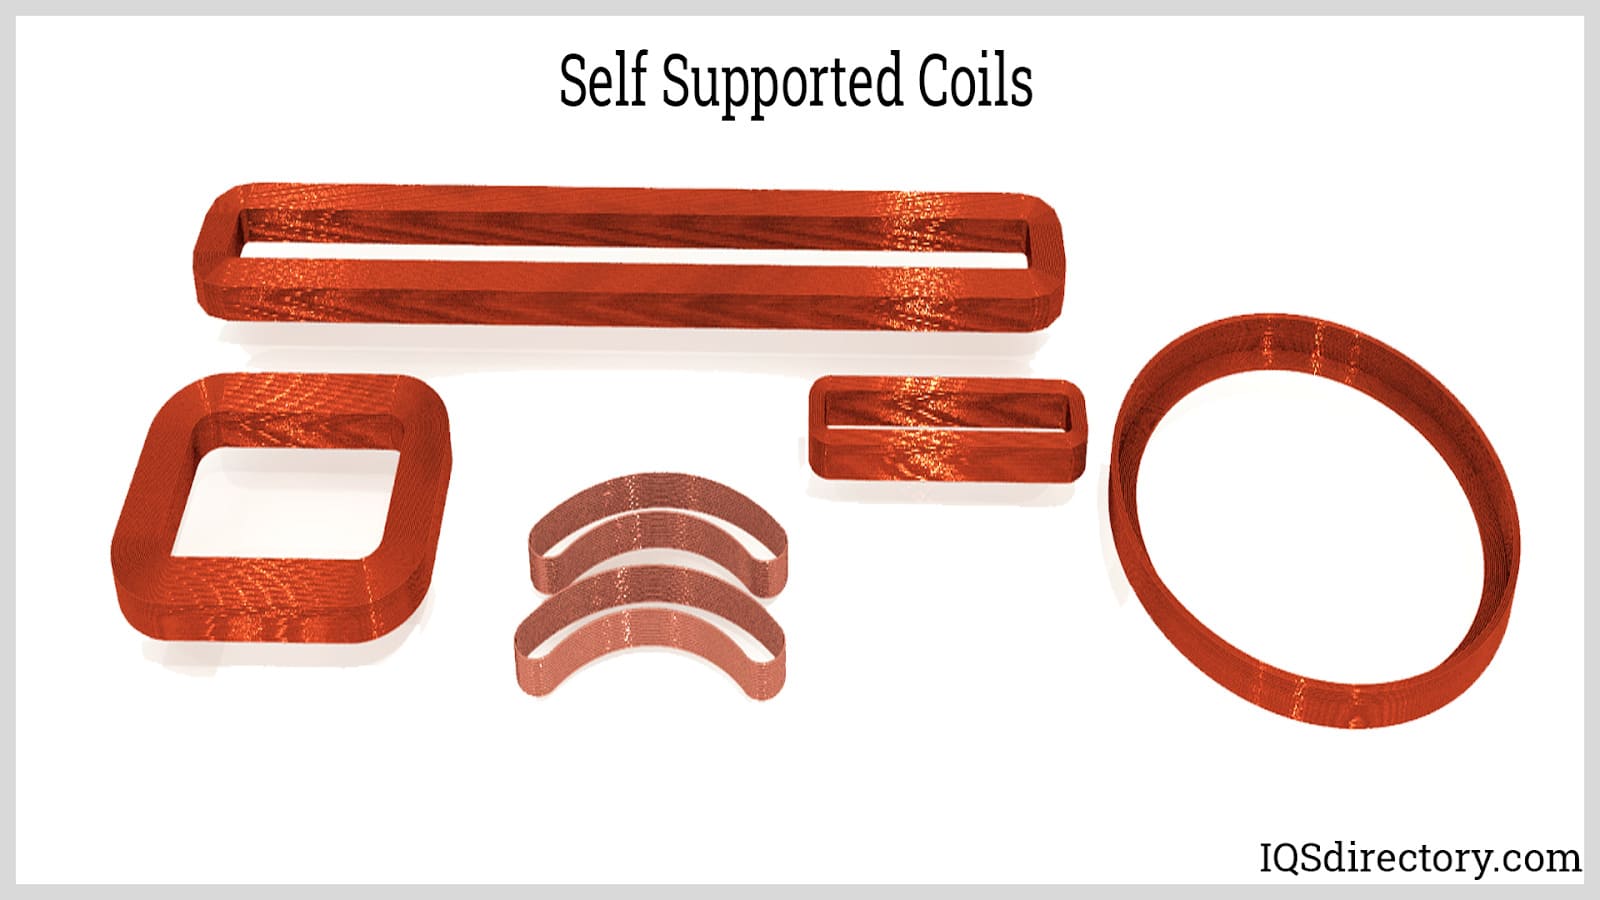 Self Supported Coils